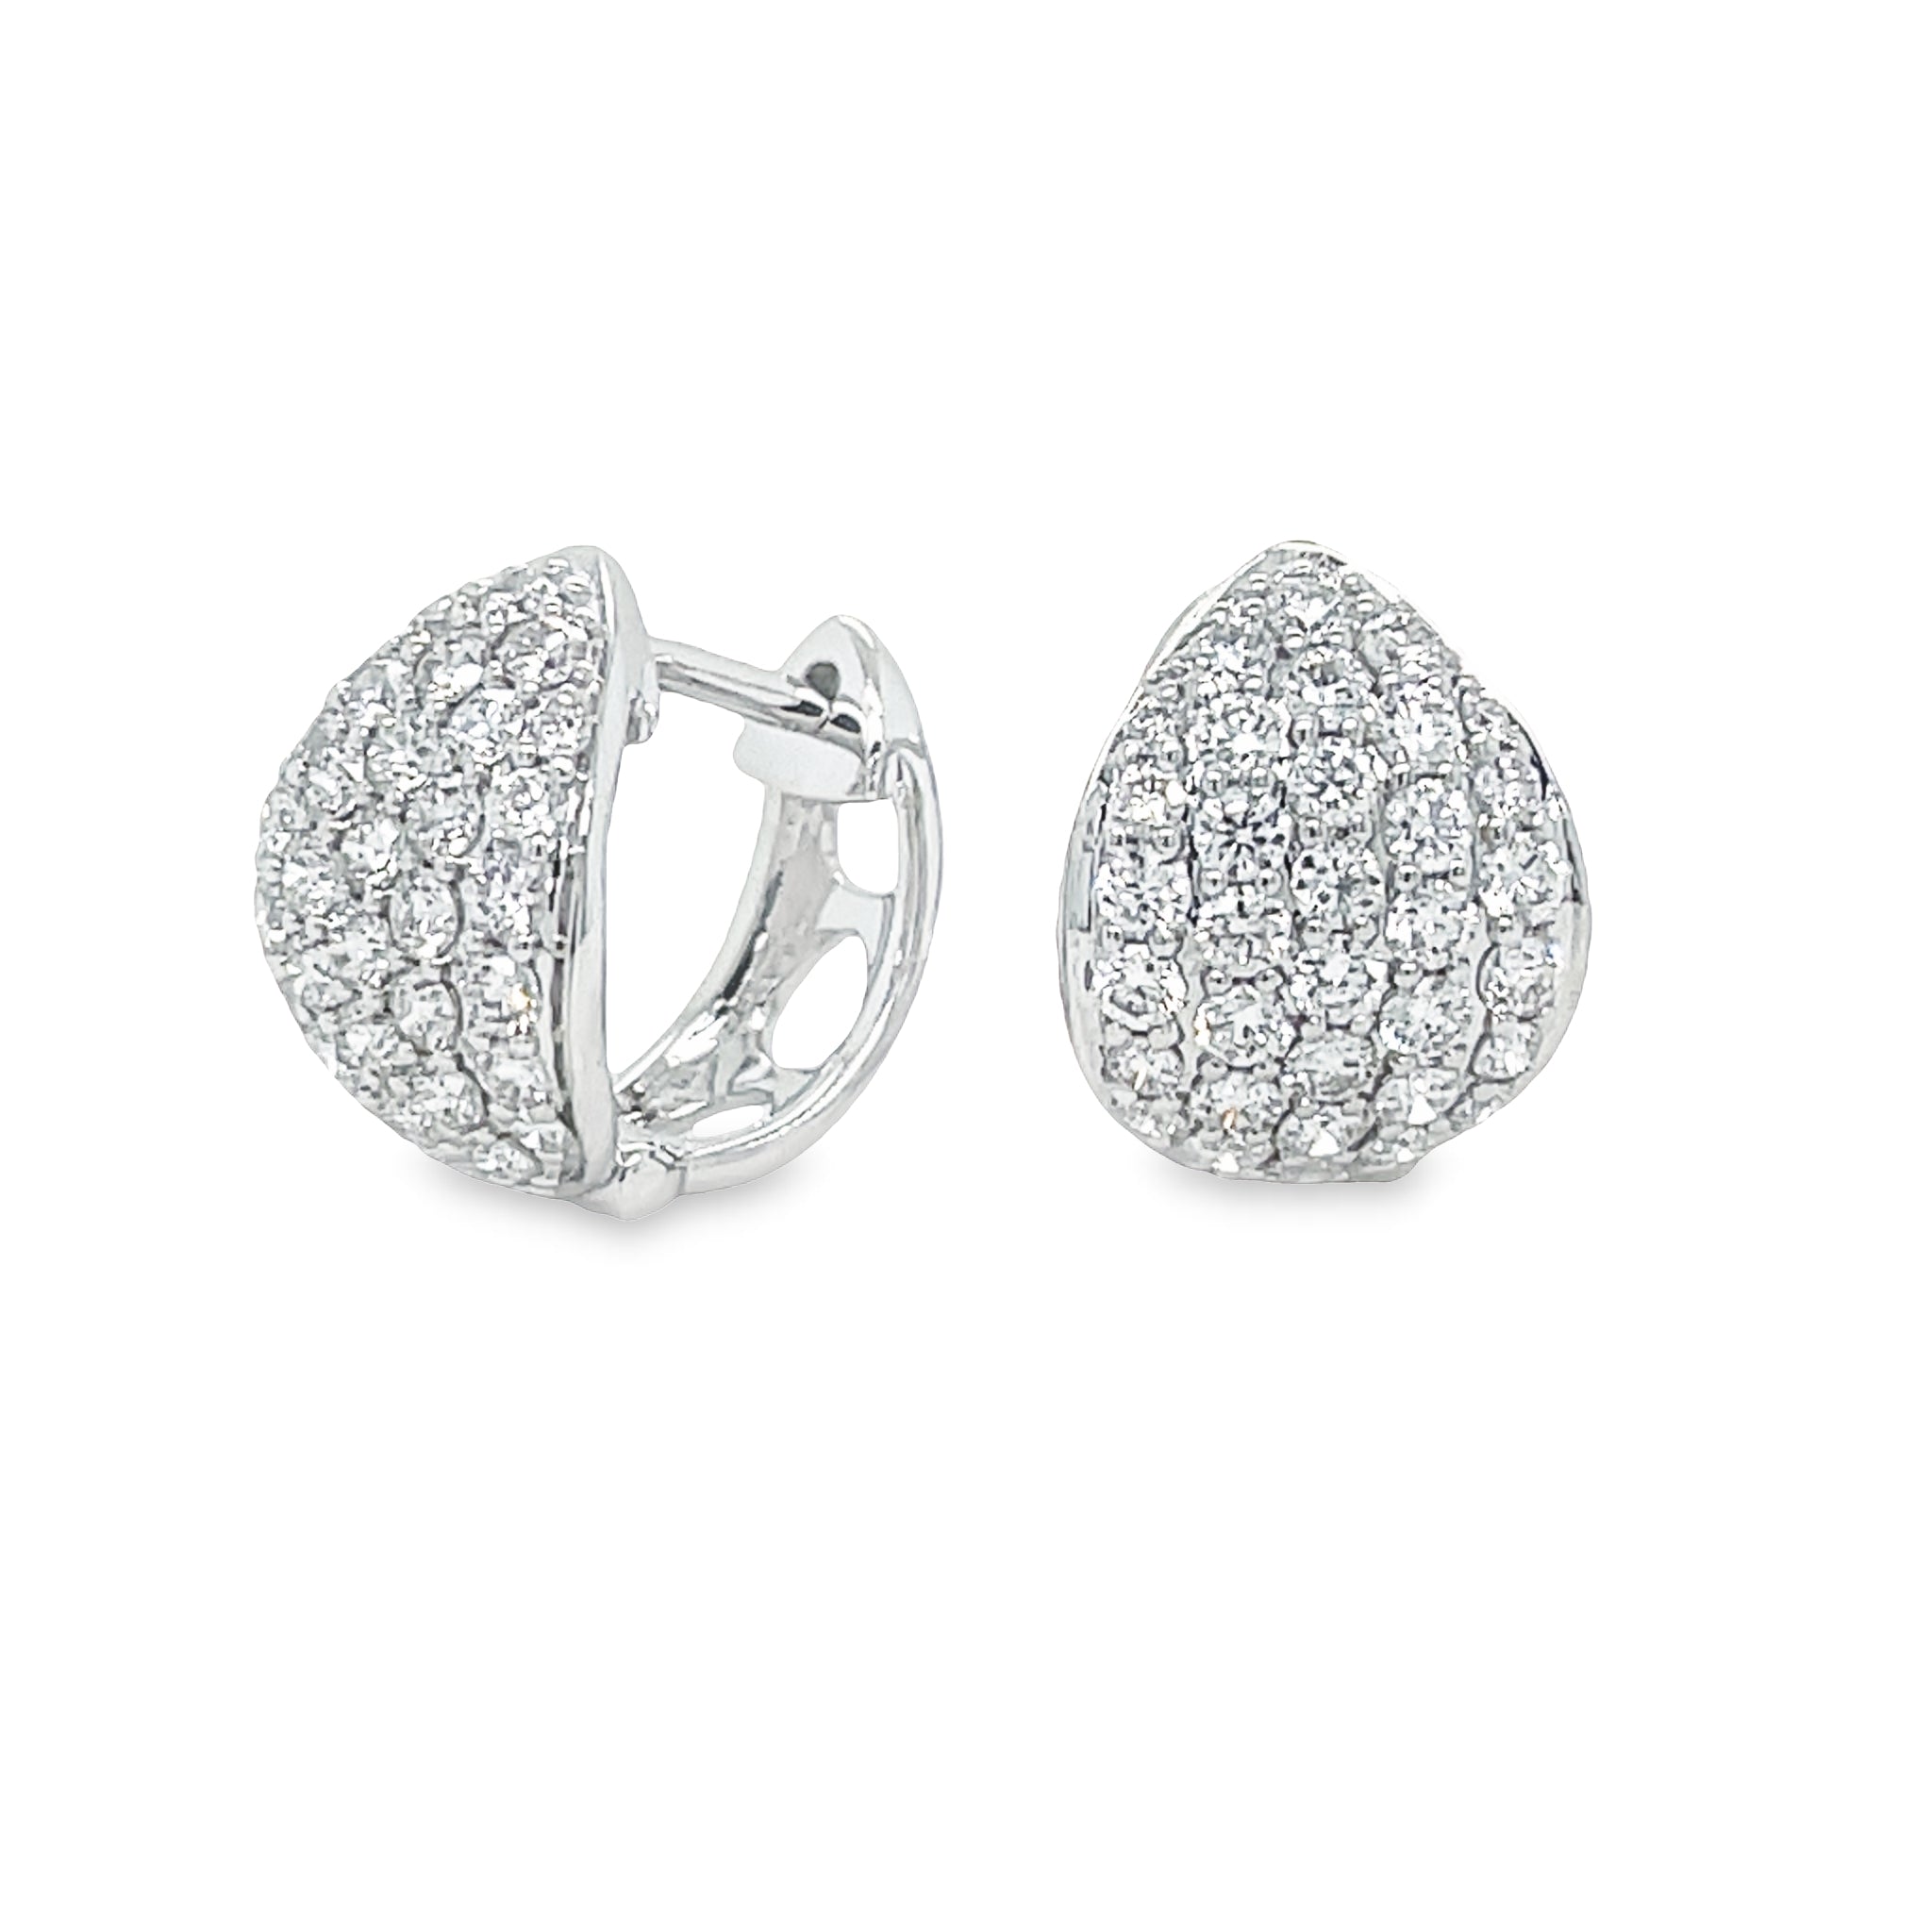 Glamorize your look with these stunning Drop Shape Diamond Huggies. Crafted with 18k white gold and 0.87 cts of pave diamond, they will sparkle with every move you make and be the perfect finishing touch to any outfit!